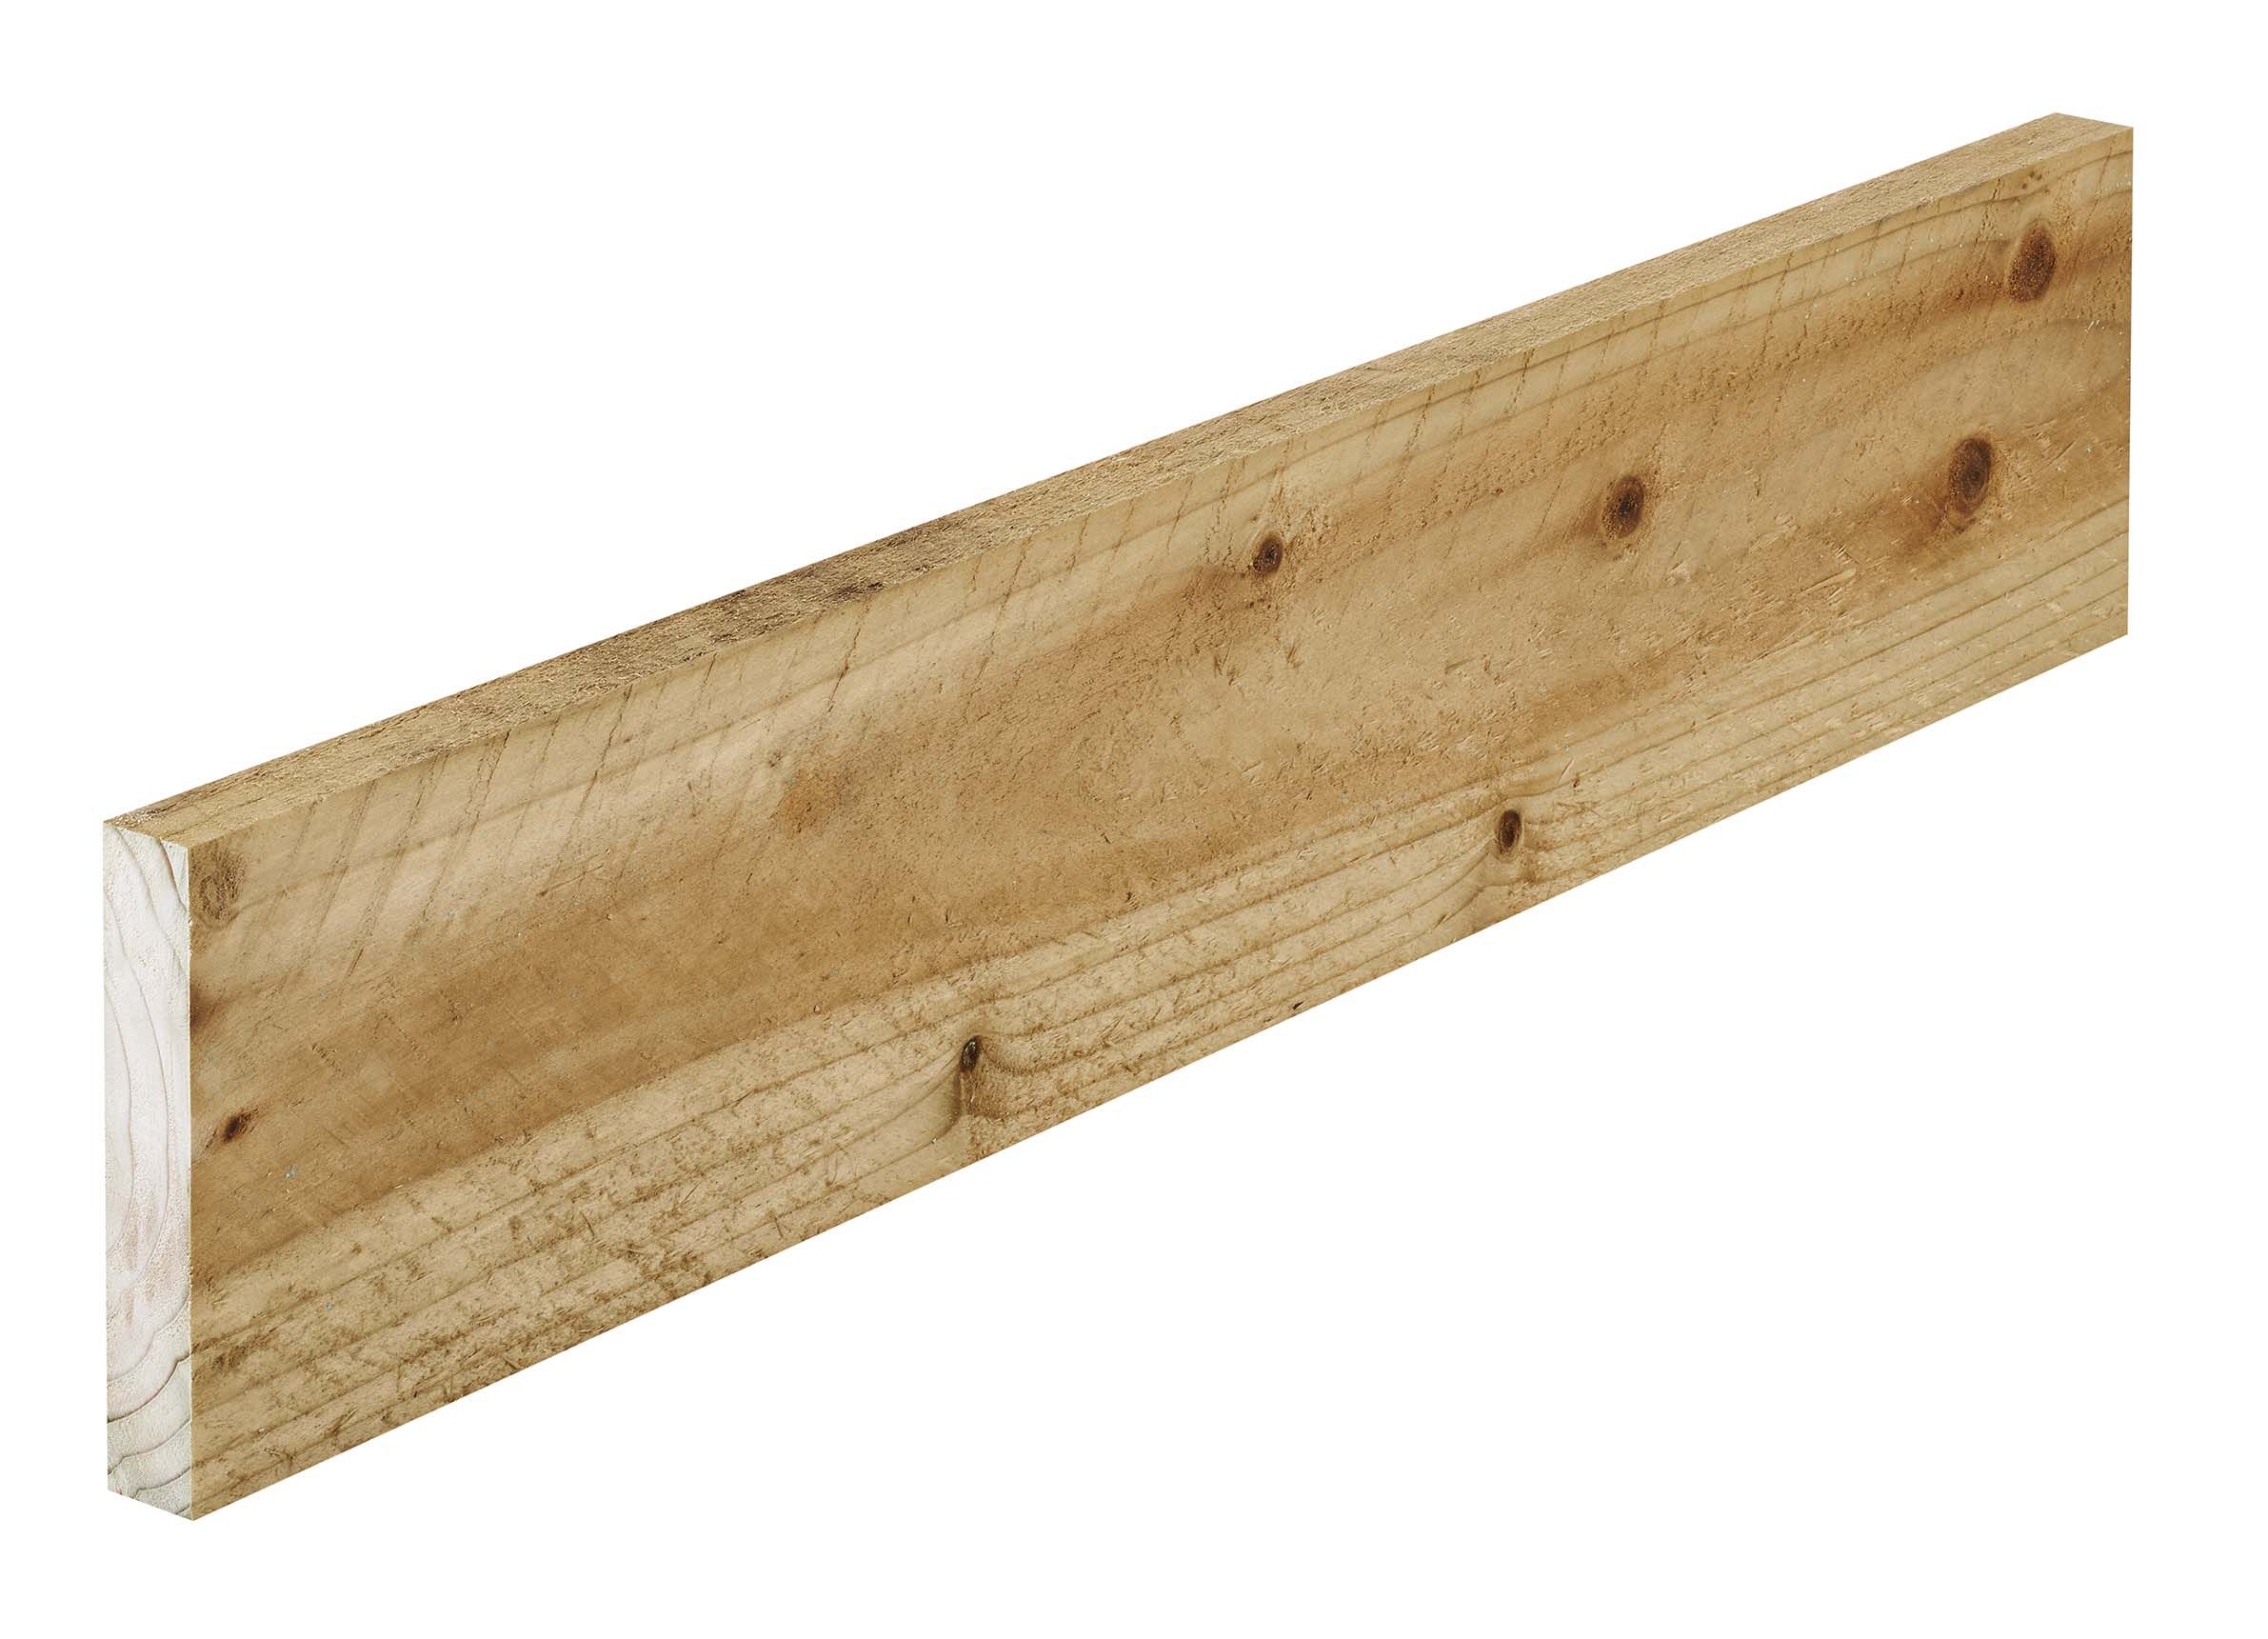 Treated Rough Sawn Whitewood Spruce Timber L 1 8m W 150mm T 22mm Diy At B Q